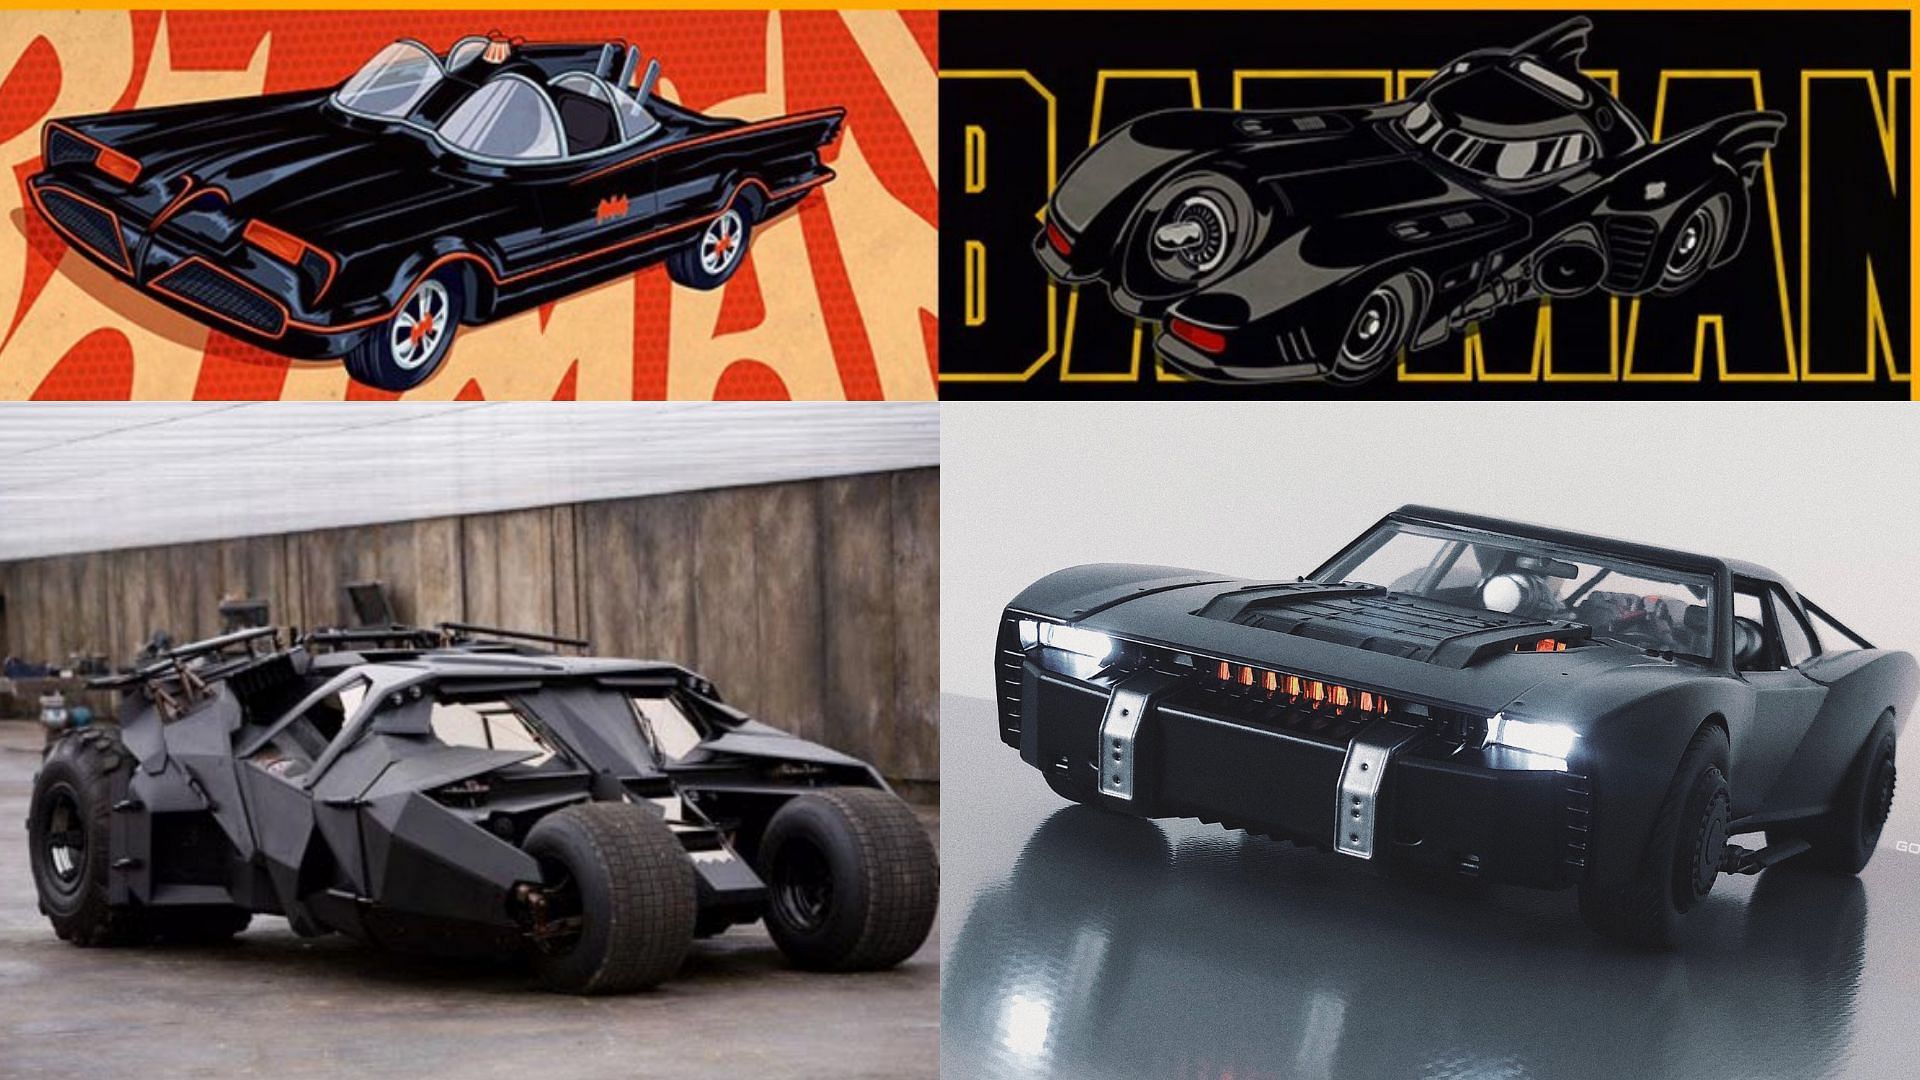 The Batmobile's transformation through the years